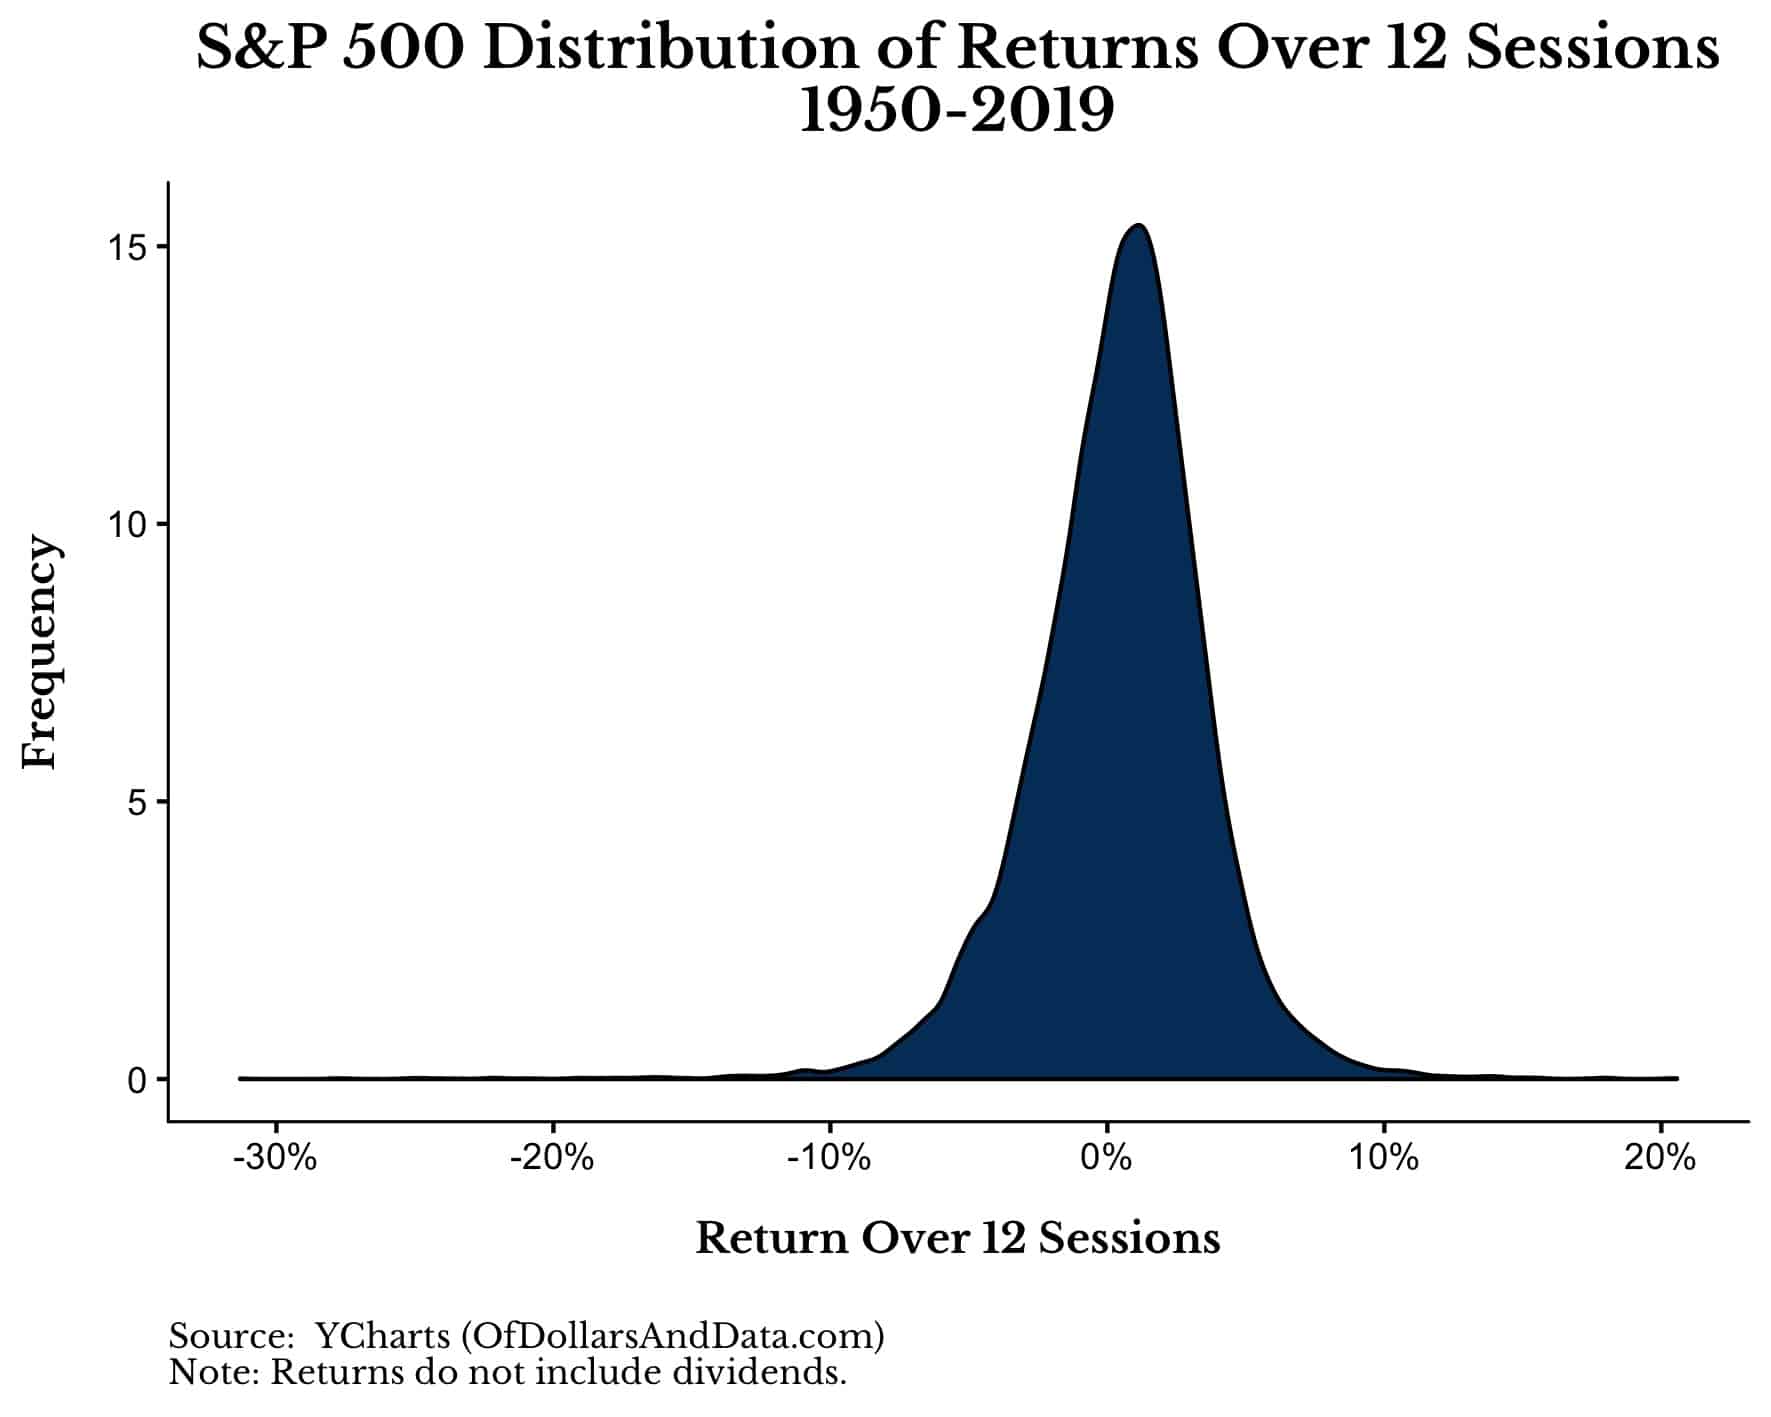 S&P 500 distribution of returns over 12 sessions.